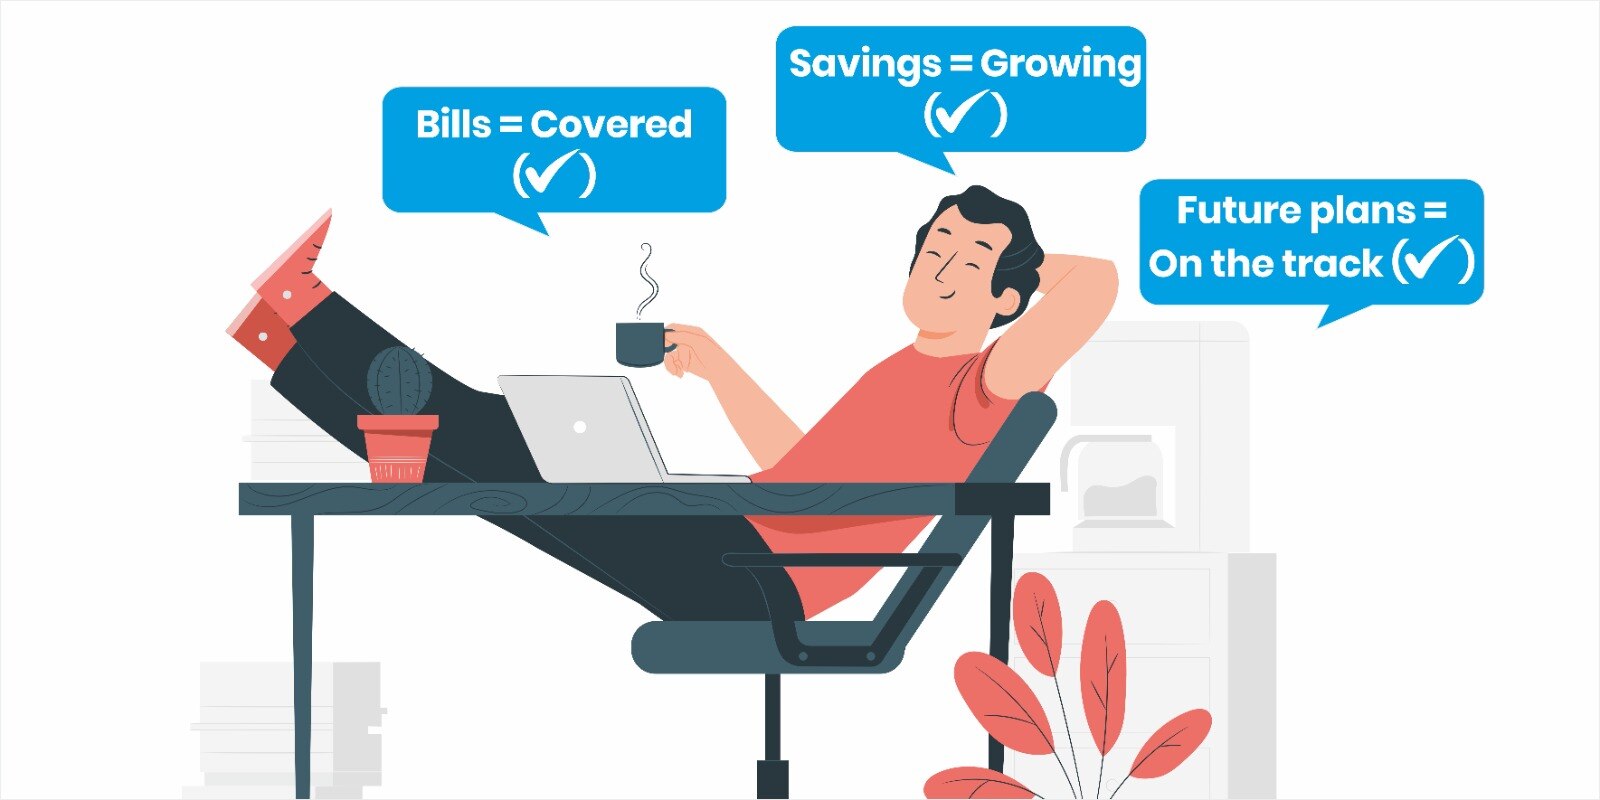 This image portrays a scene where a person is enjoying his financial well-being, contemplating his life goals, which are on track, his bills, which are fully covered, and his savings, which are growing.